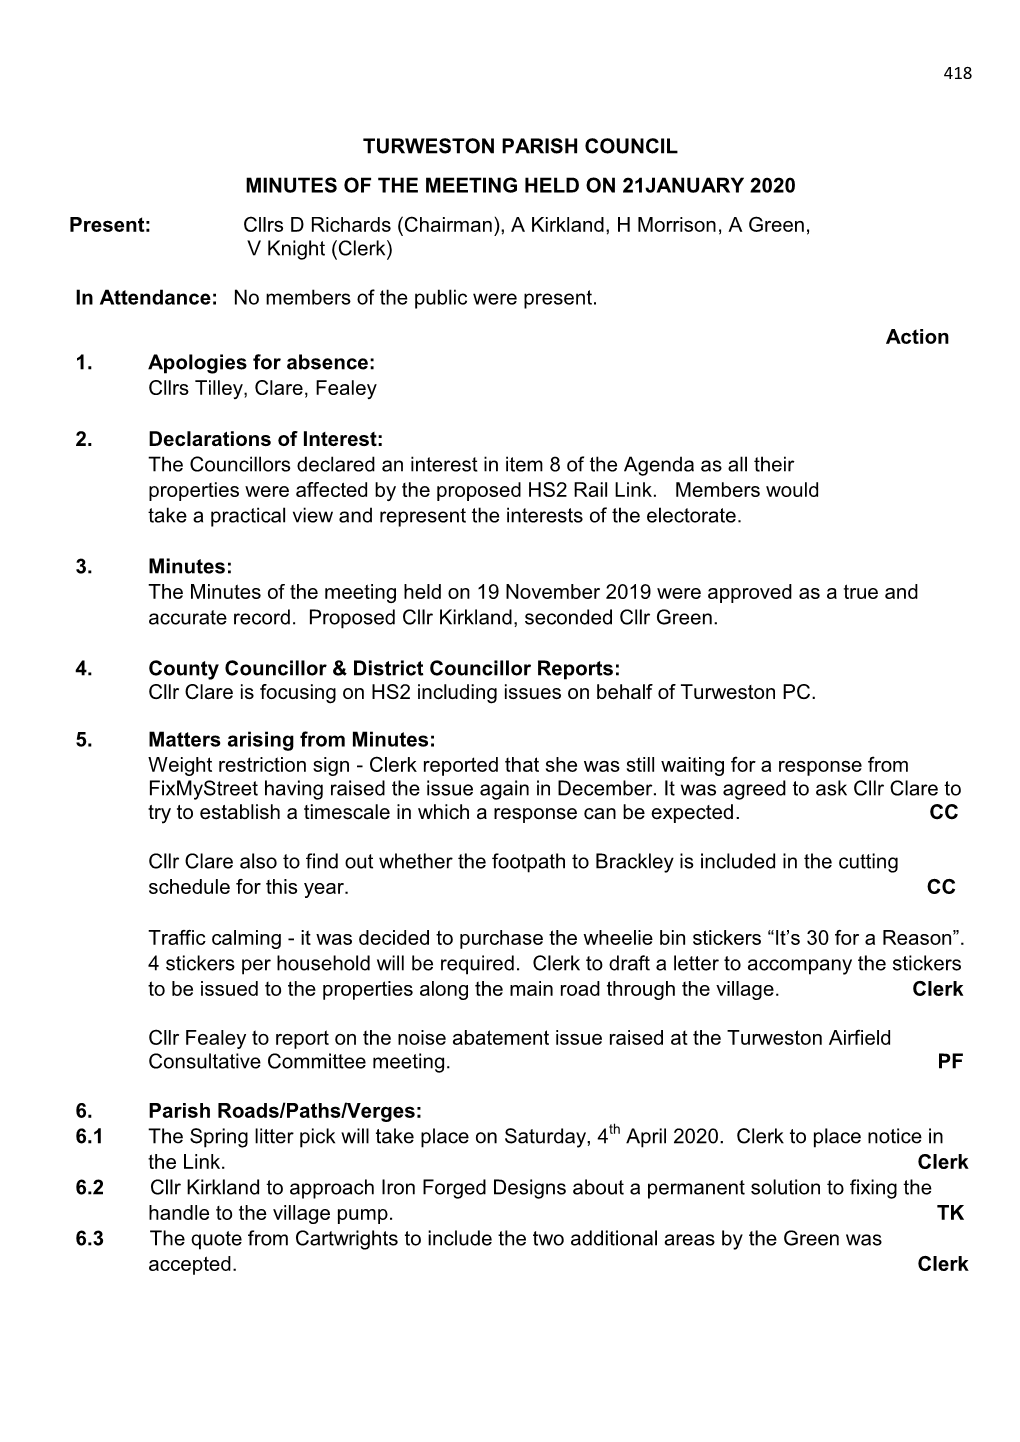 TURWESTON PARISH COUNCIL MINUTES of the MEETING HELD on 21JANUARY 2020 Present: Cllrs D Richards (Chairman), a Kirkland, H Morrison, a Green, V Knight (Clerk)